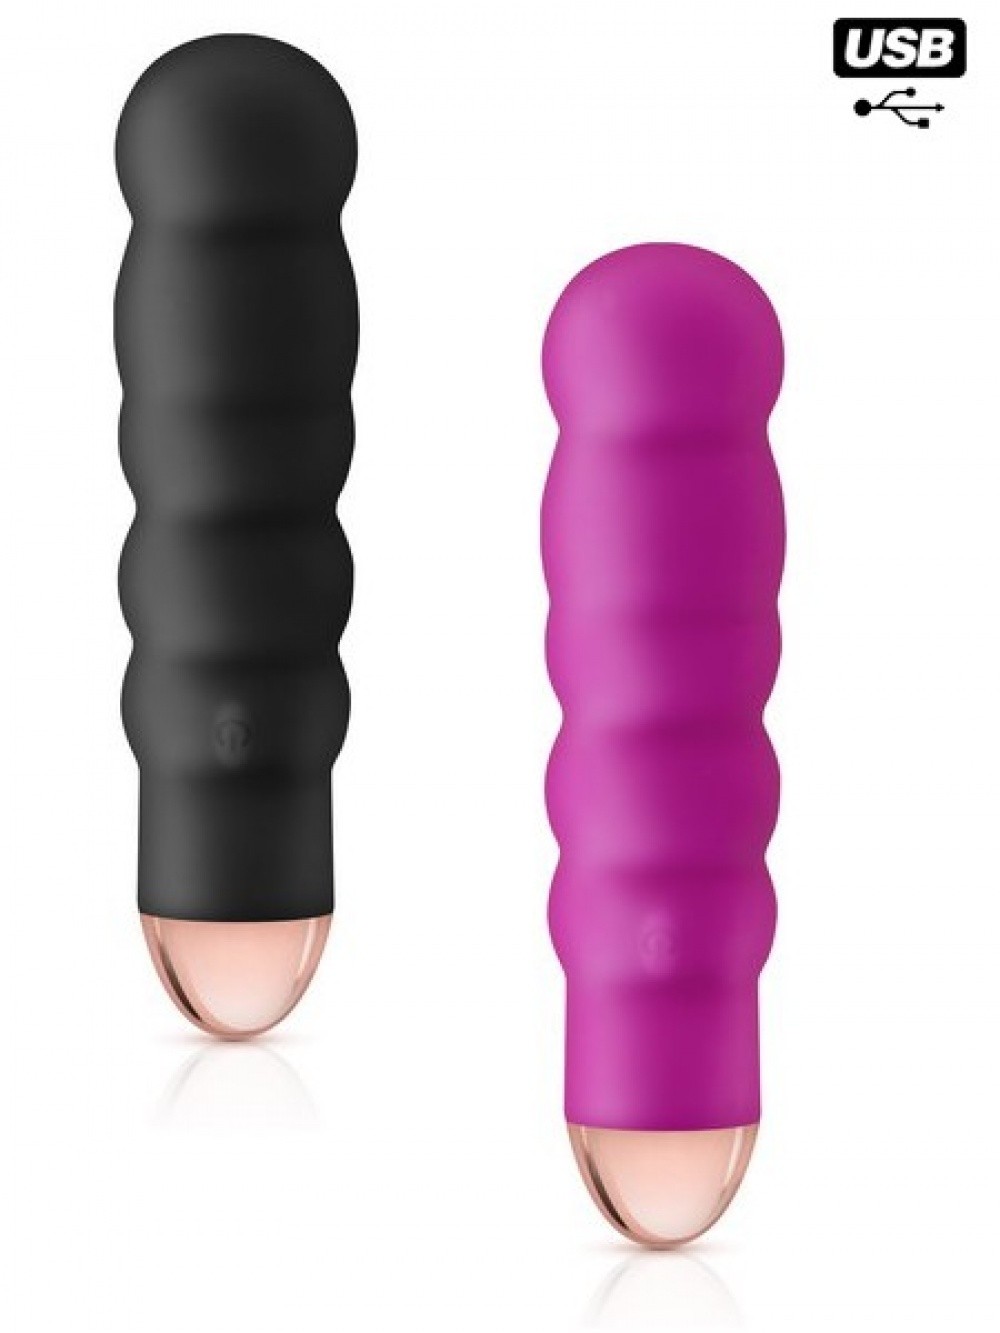 MyFirst Petit vib detail rechargeromasseur rechargeable Giggle